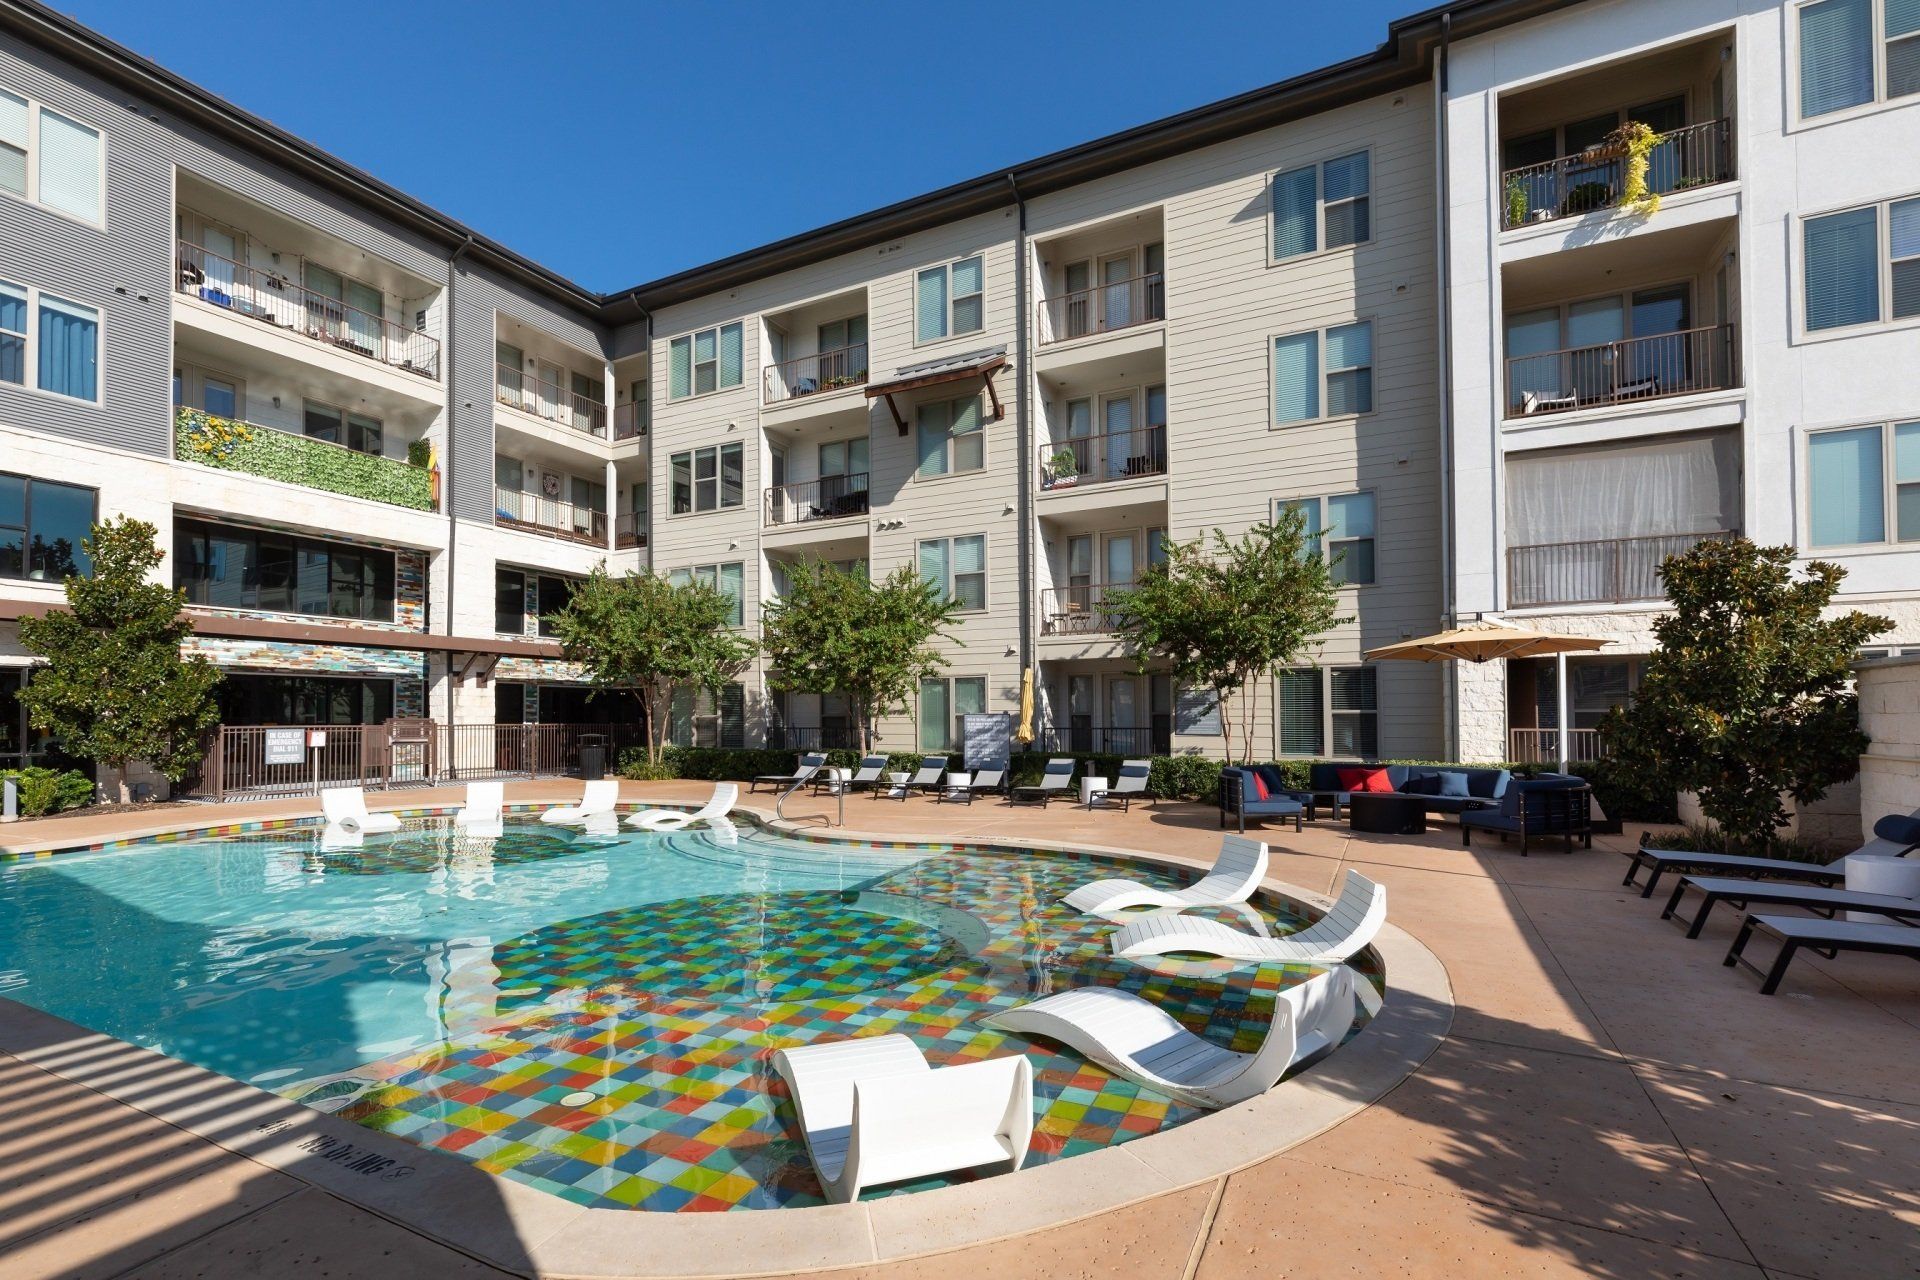 Mercantile River District | Pool Outside